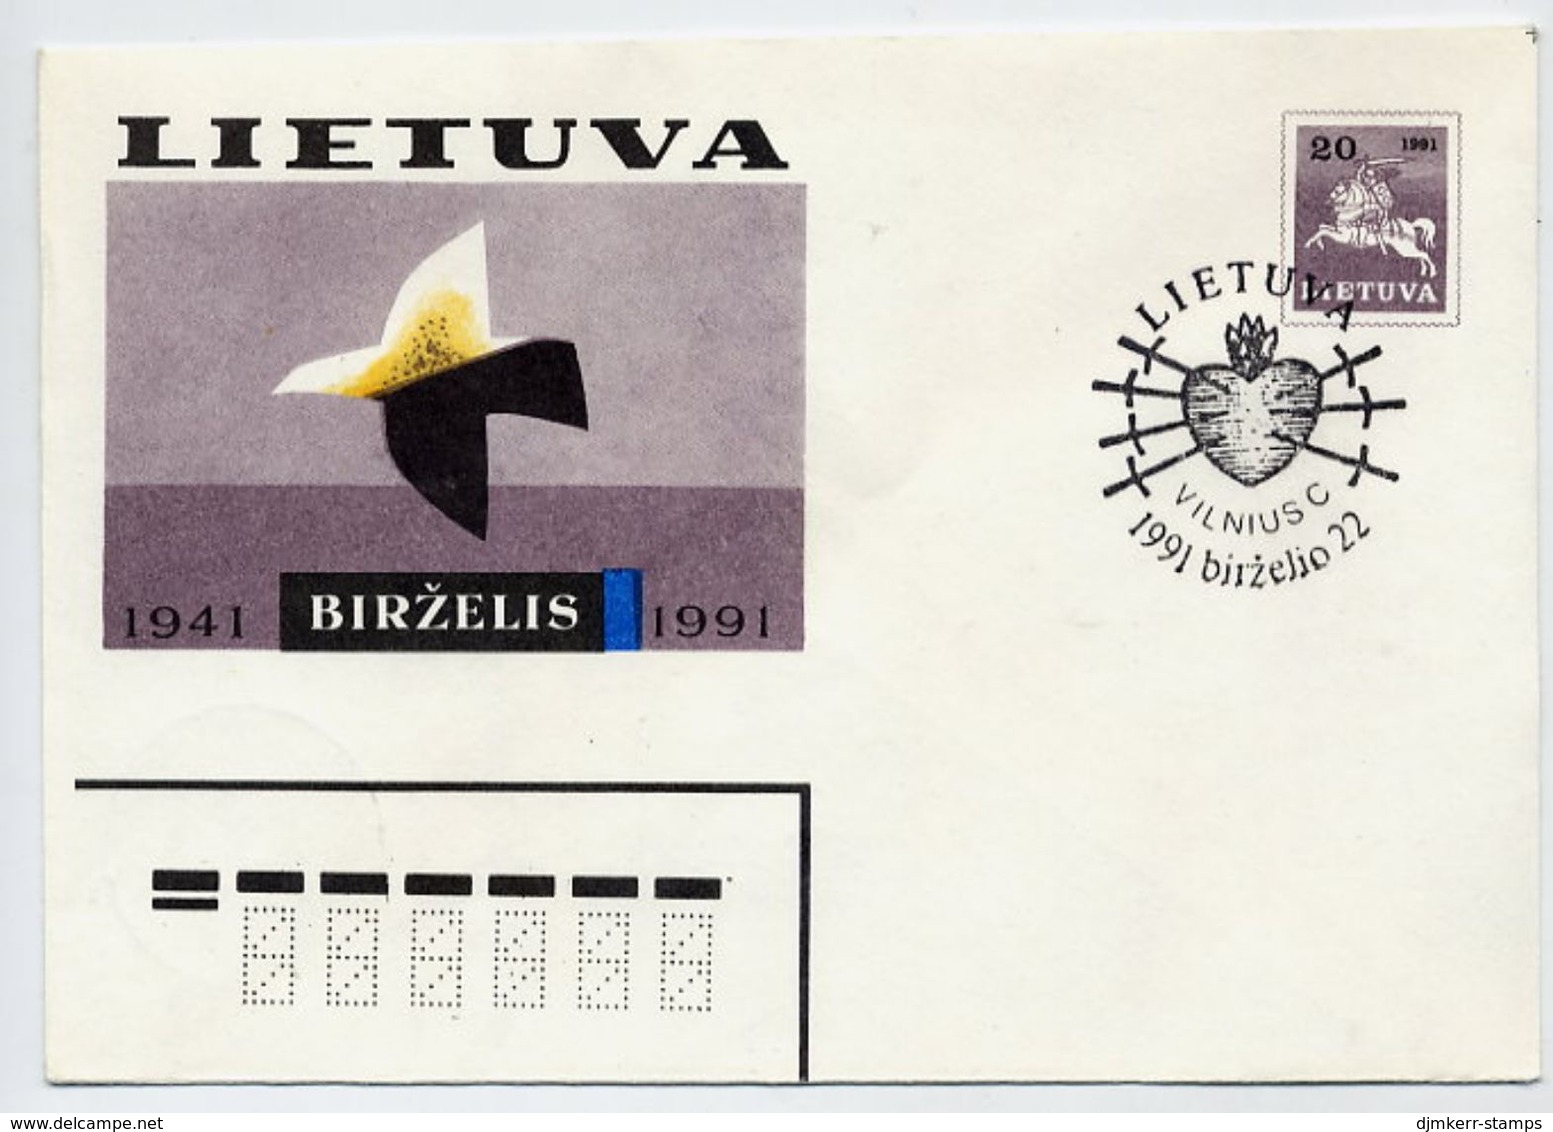 LITHUANIA 1991  Anniversary Of Rising Against The Soviet Union Stationery Envelope, Cancelled.  Michel U11 - Litouwen